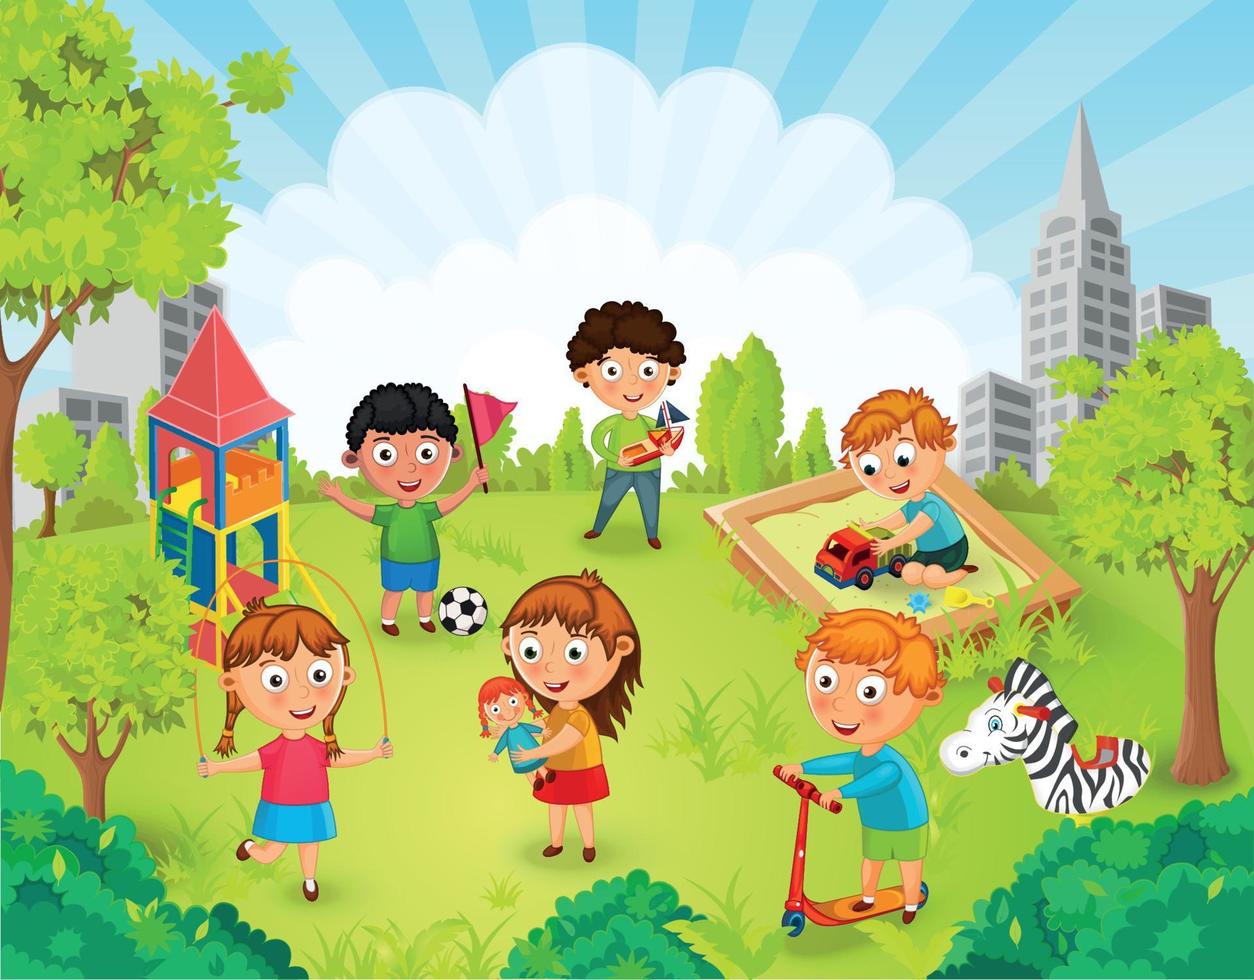 Children playing in the park vector illustration